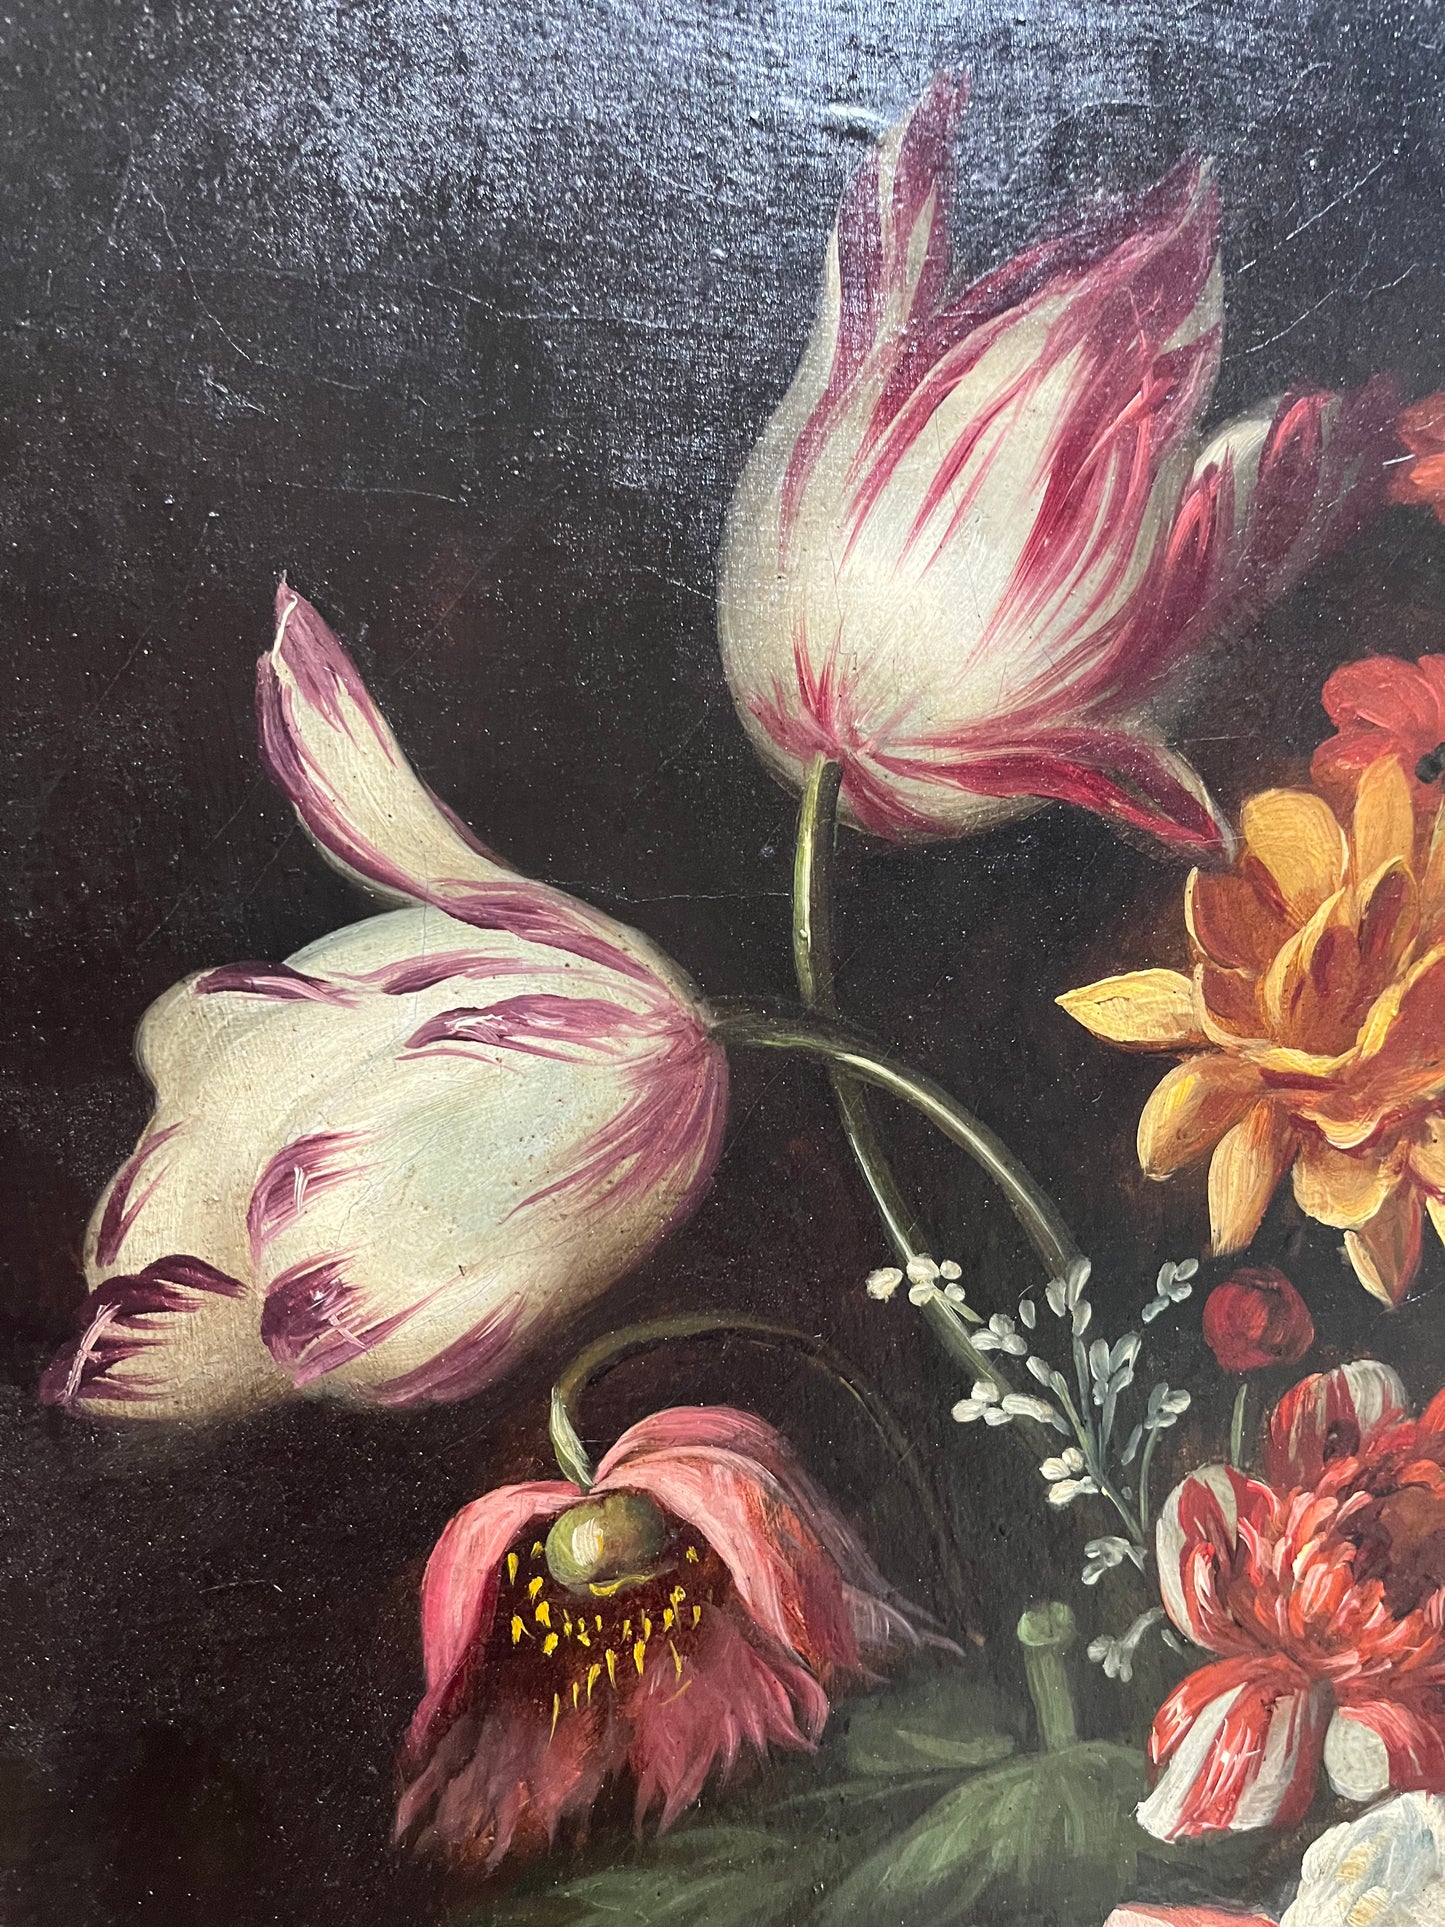 Antique floral still life of flowers